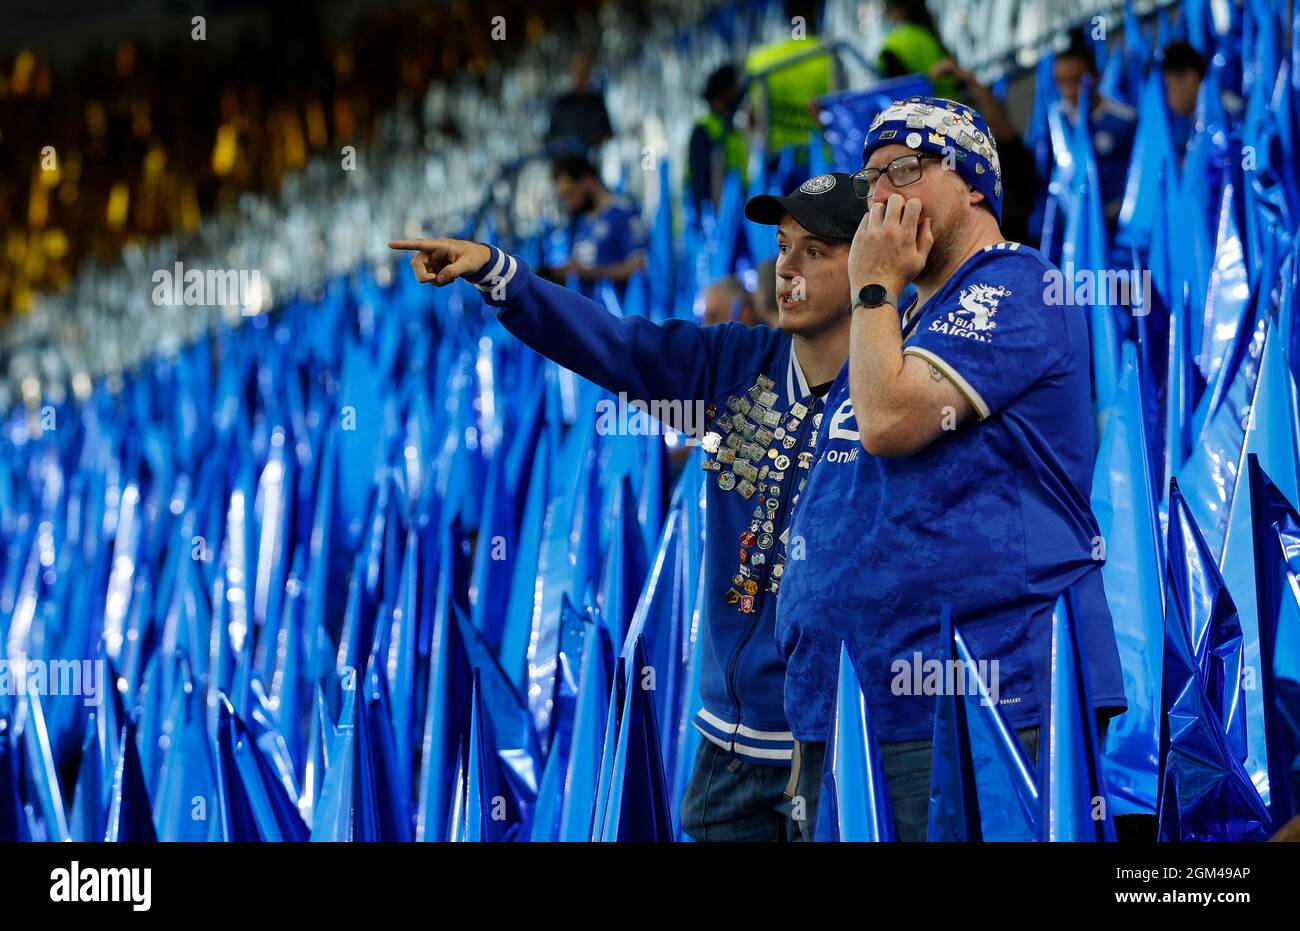 Leicester, UK. 16th Sep, 2021. Leicester fans take their seats amongst the many flags during the UEFA Europa League match at the King Power Stadium, Leicester. Picture credit should read: Darren Staples/Sportimage Credit: Sportimage/Alamy Live News Stock Photo